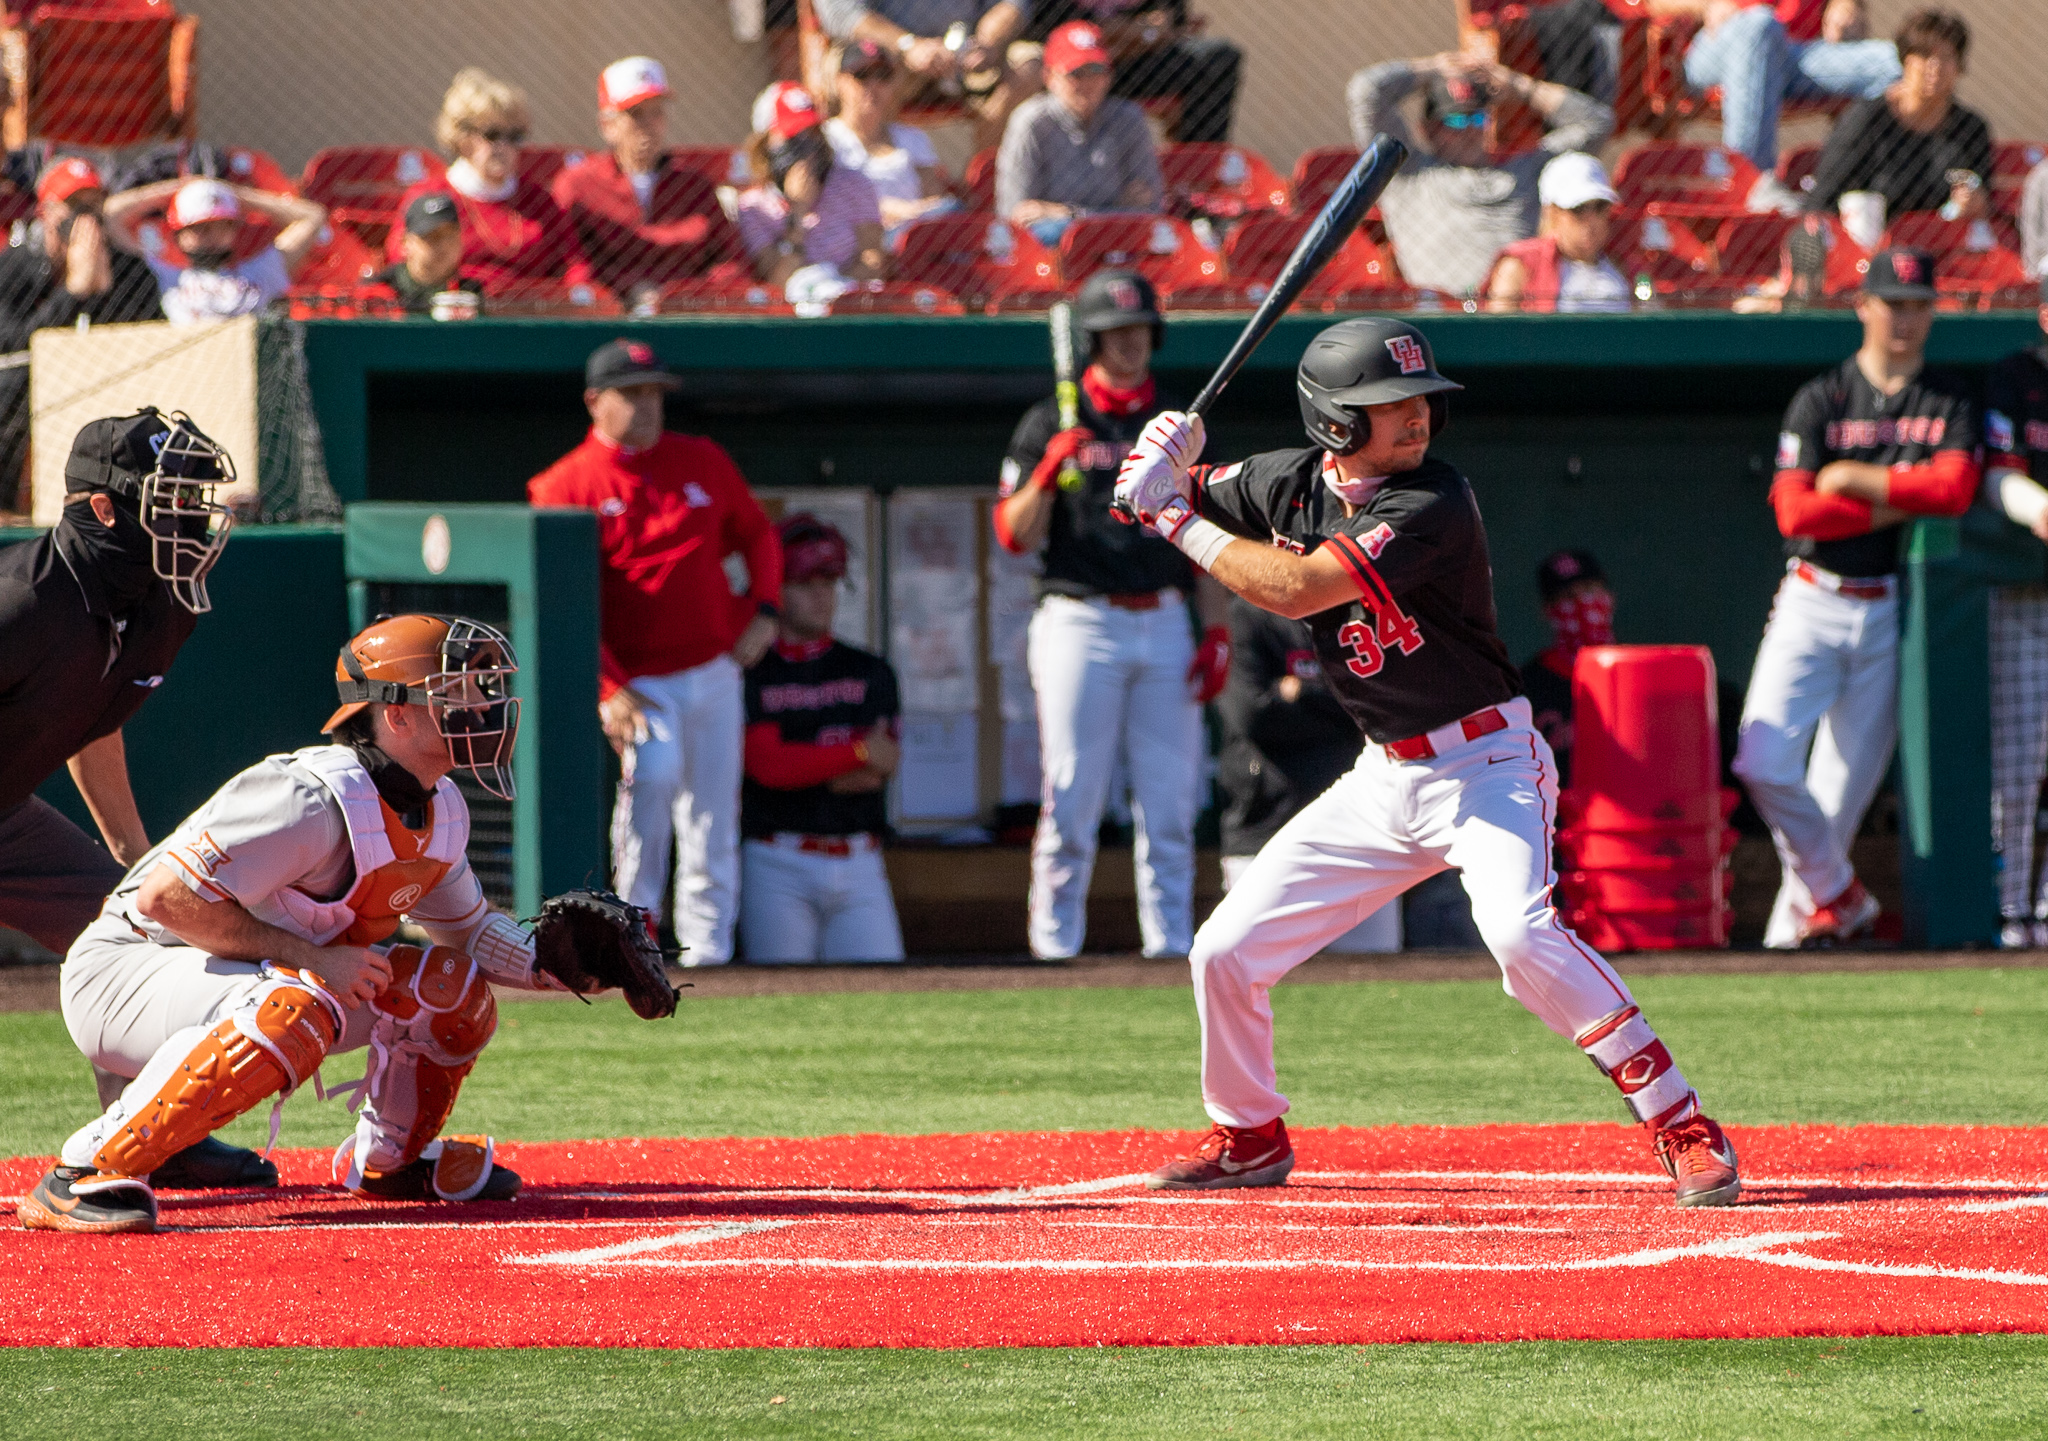 Junior catcher Kyle Lovelace launched his first home run in his UH baseball career Wednesday night against Wichita State. | Andy Yanez/The Cougar